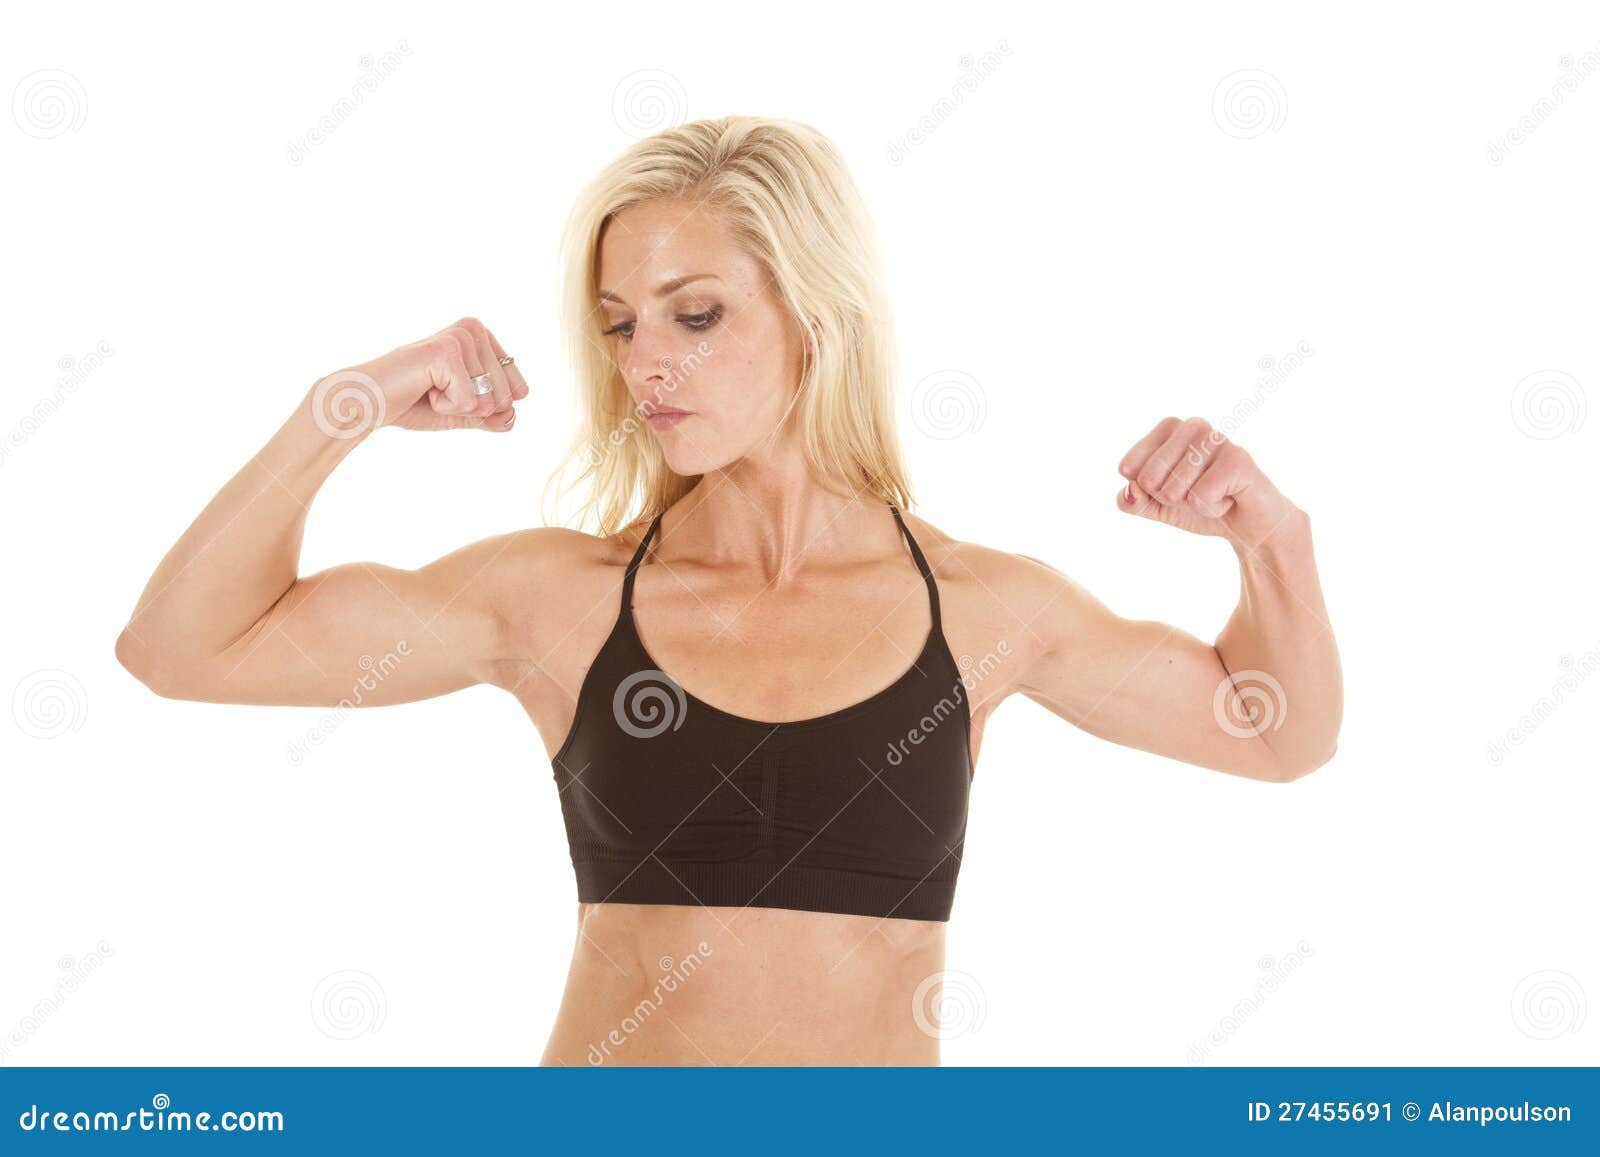 830 Black Woman Flexing Muscle Stock Photos - Free & Royalty-Free